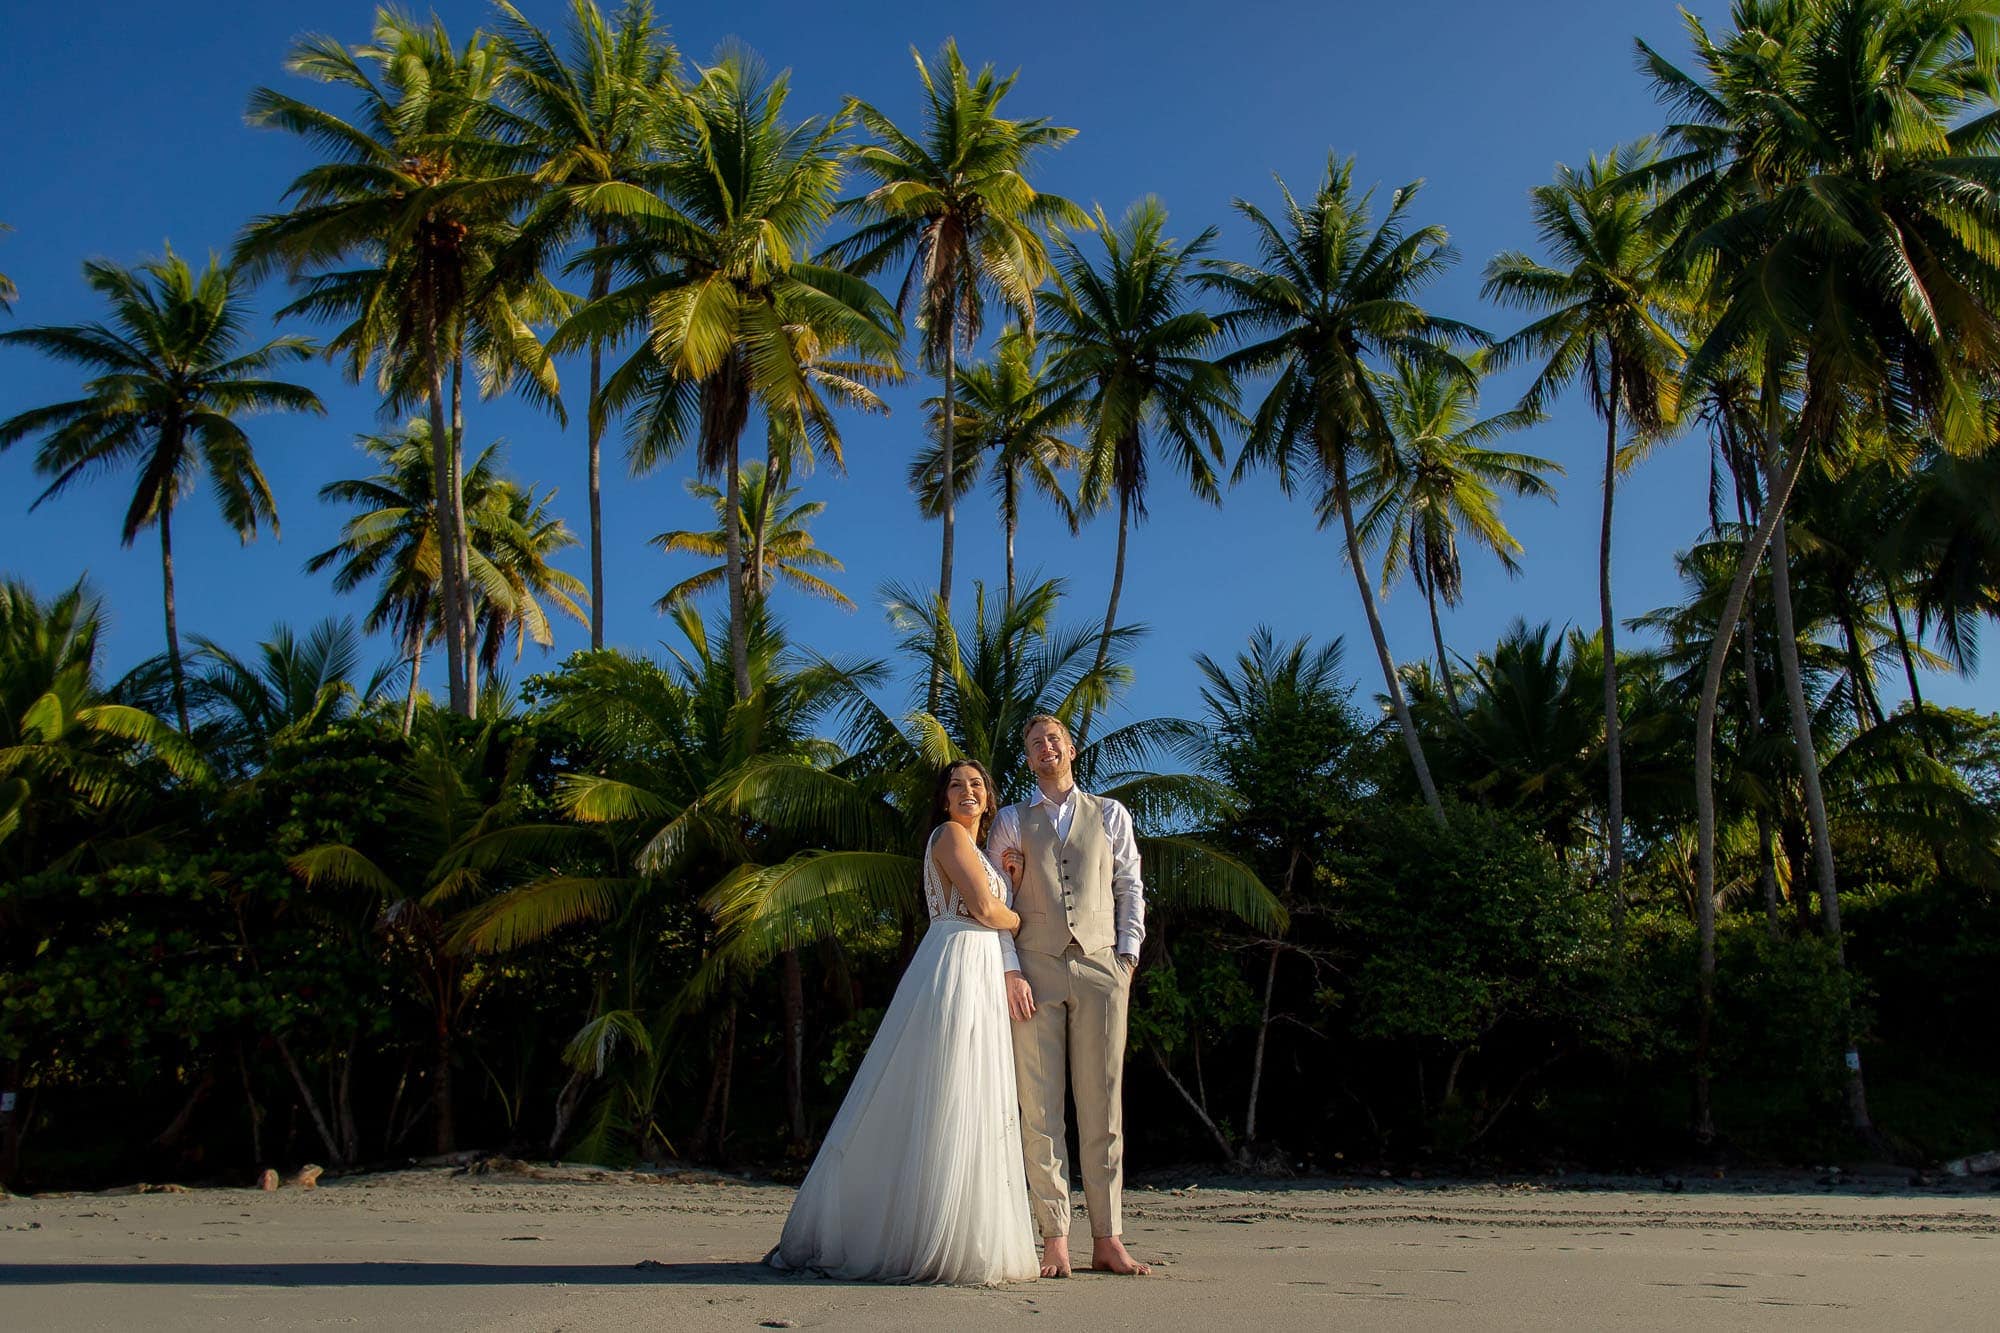 Bride and groom on the beach the morning after their small wedding in Costa Rica